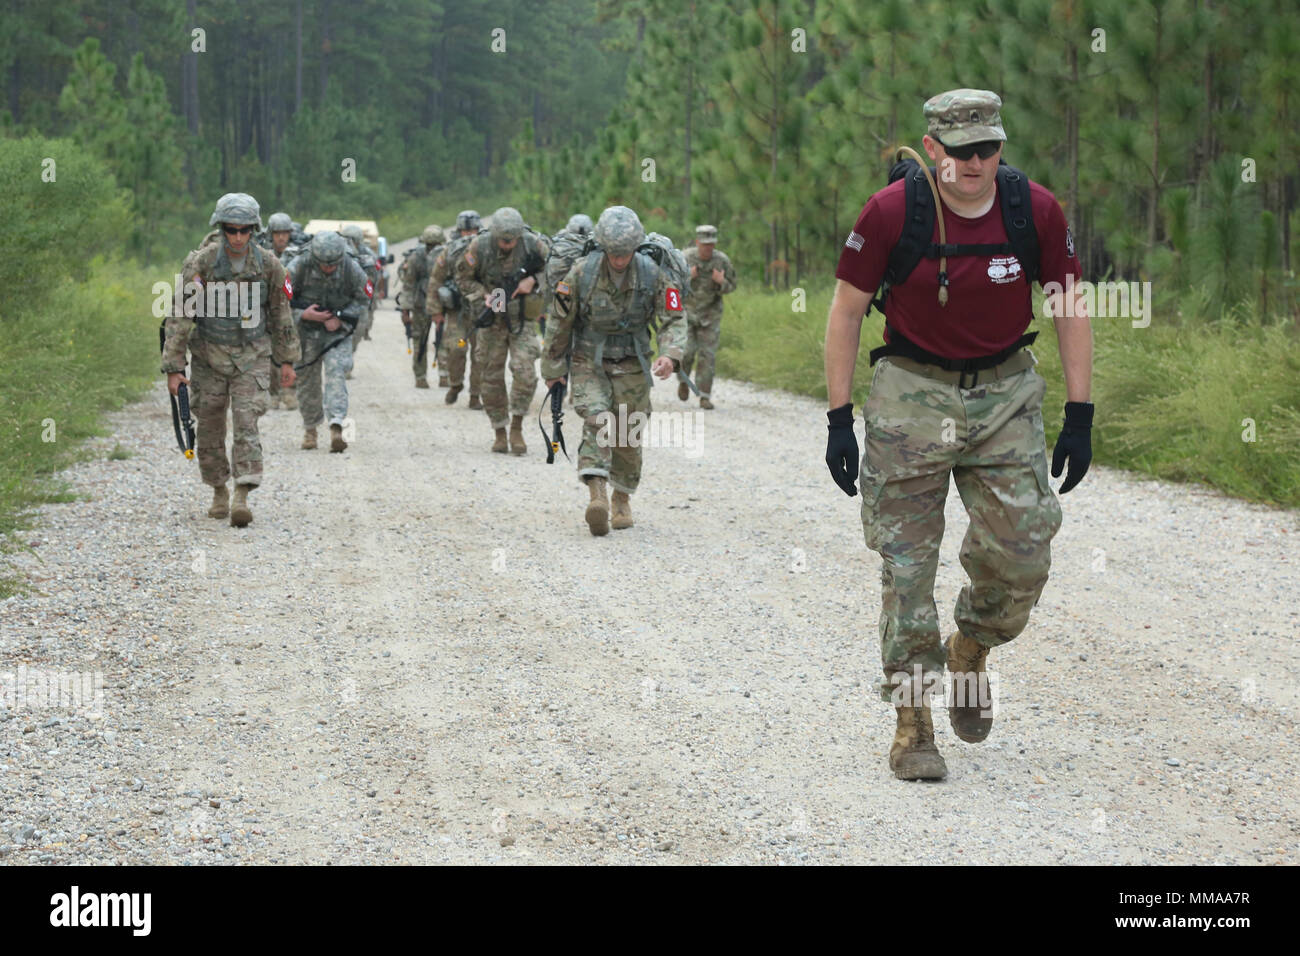 U.S. Soldiers, competing in the 2017 Best Medic Competition, participate in a ruck march during the 2017 Best Medic Competition at Fort Bragg, N.C., Sept. 18, 2017. The competition tested the physical and mental toughness, as well as the technical competence, of each medic to identify the team moving forward to represent the region at the next level of the competition.  (U.S. Army photo by Pfc. Meleesa Gutierrez) Stock Photo